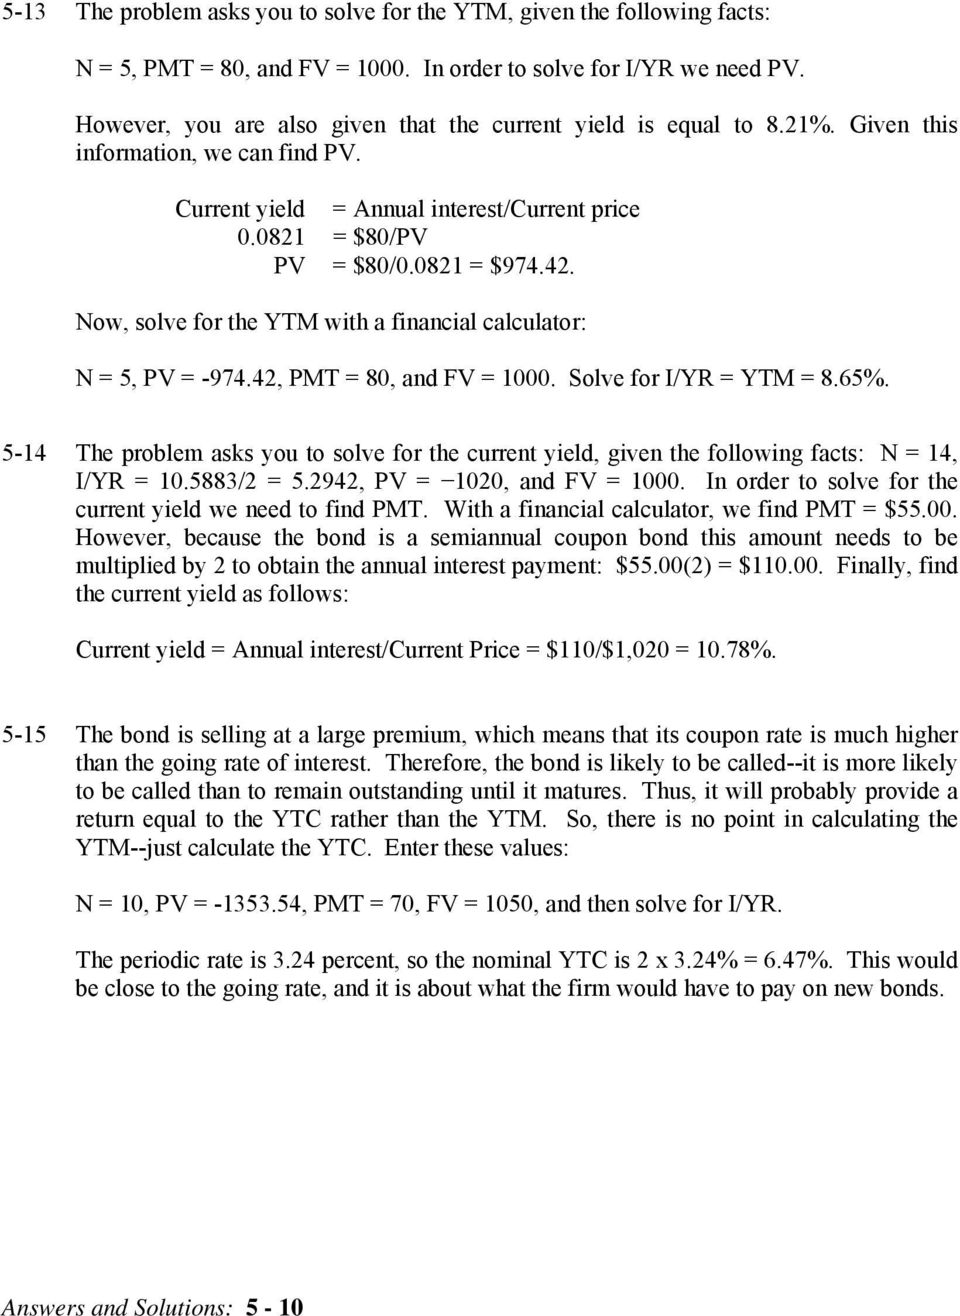 Now, solve for the YTM with a financial calculator: N = 5, PV = -974.42, PMT = 80, and FV = 1000. Solve for I/YR = YTM = 8.65%.